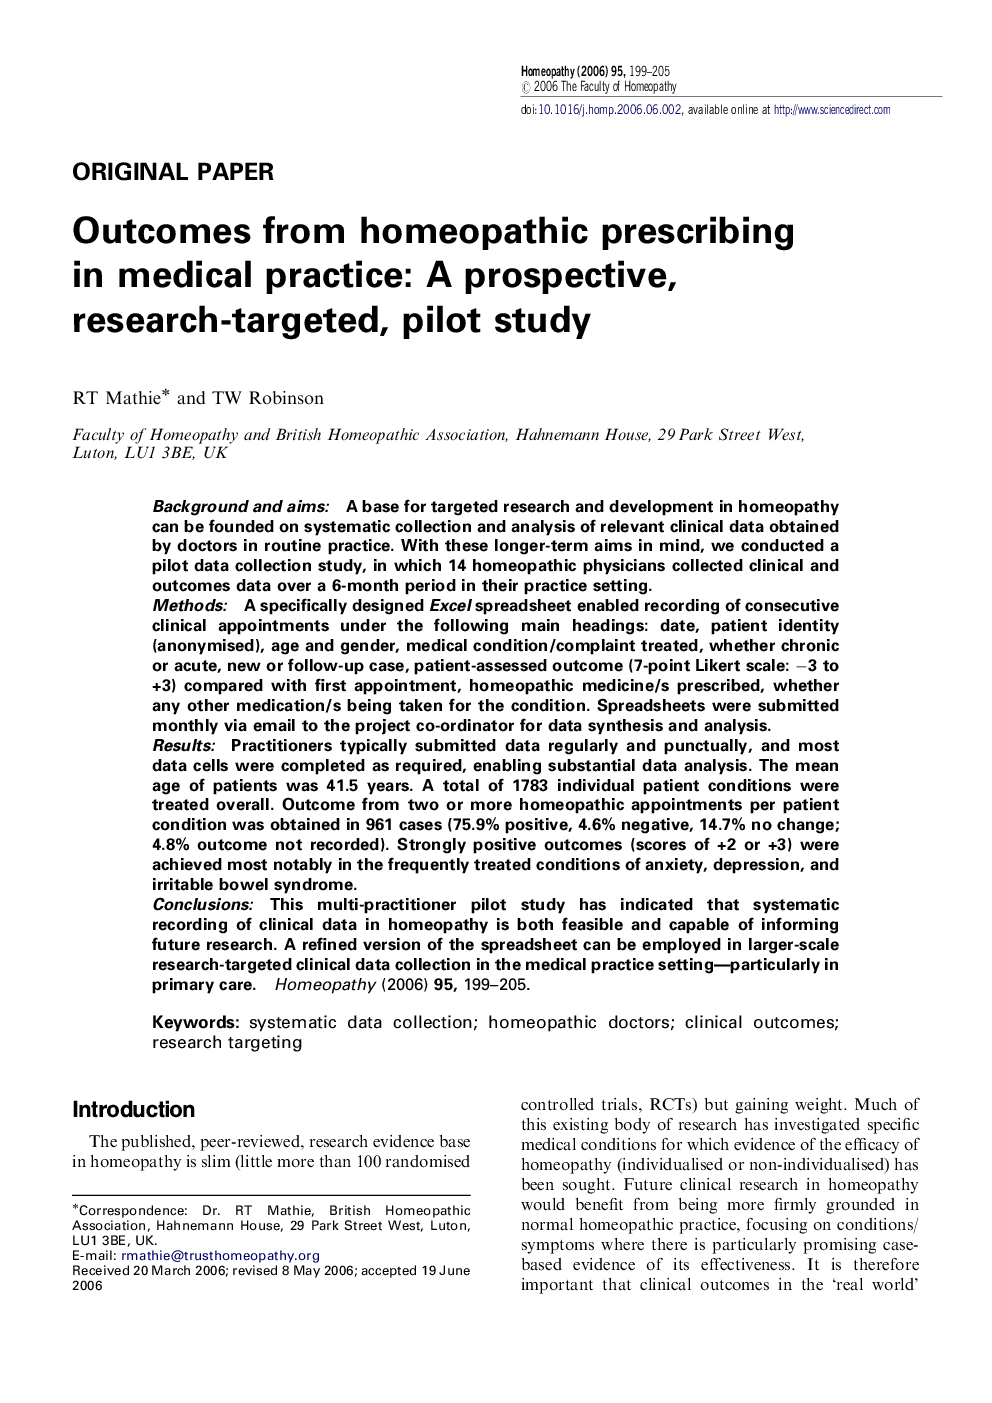 Outcomes from homeopathic prescribing in medical practice: A prospective, research-targeted, pilot study